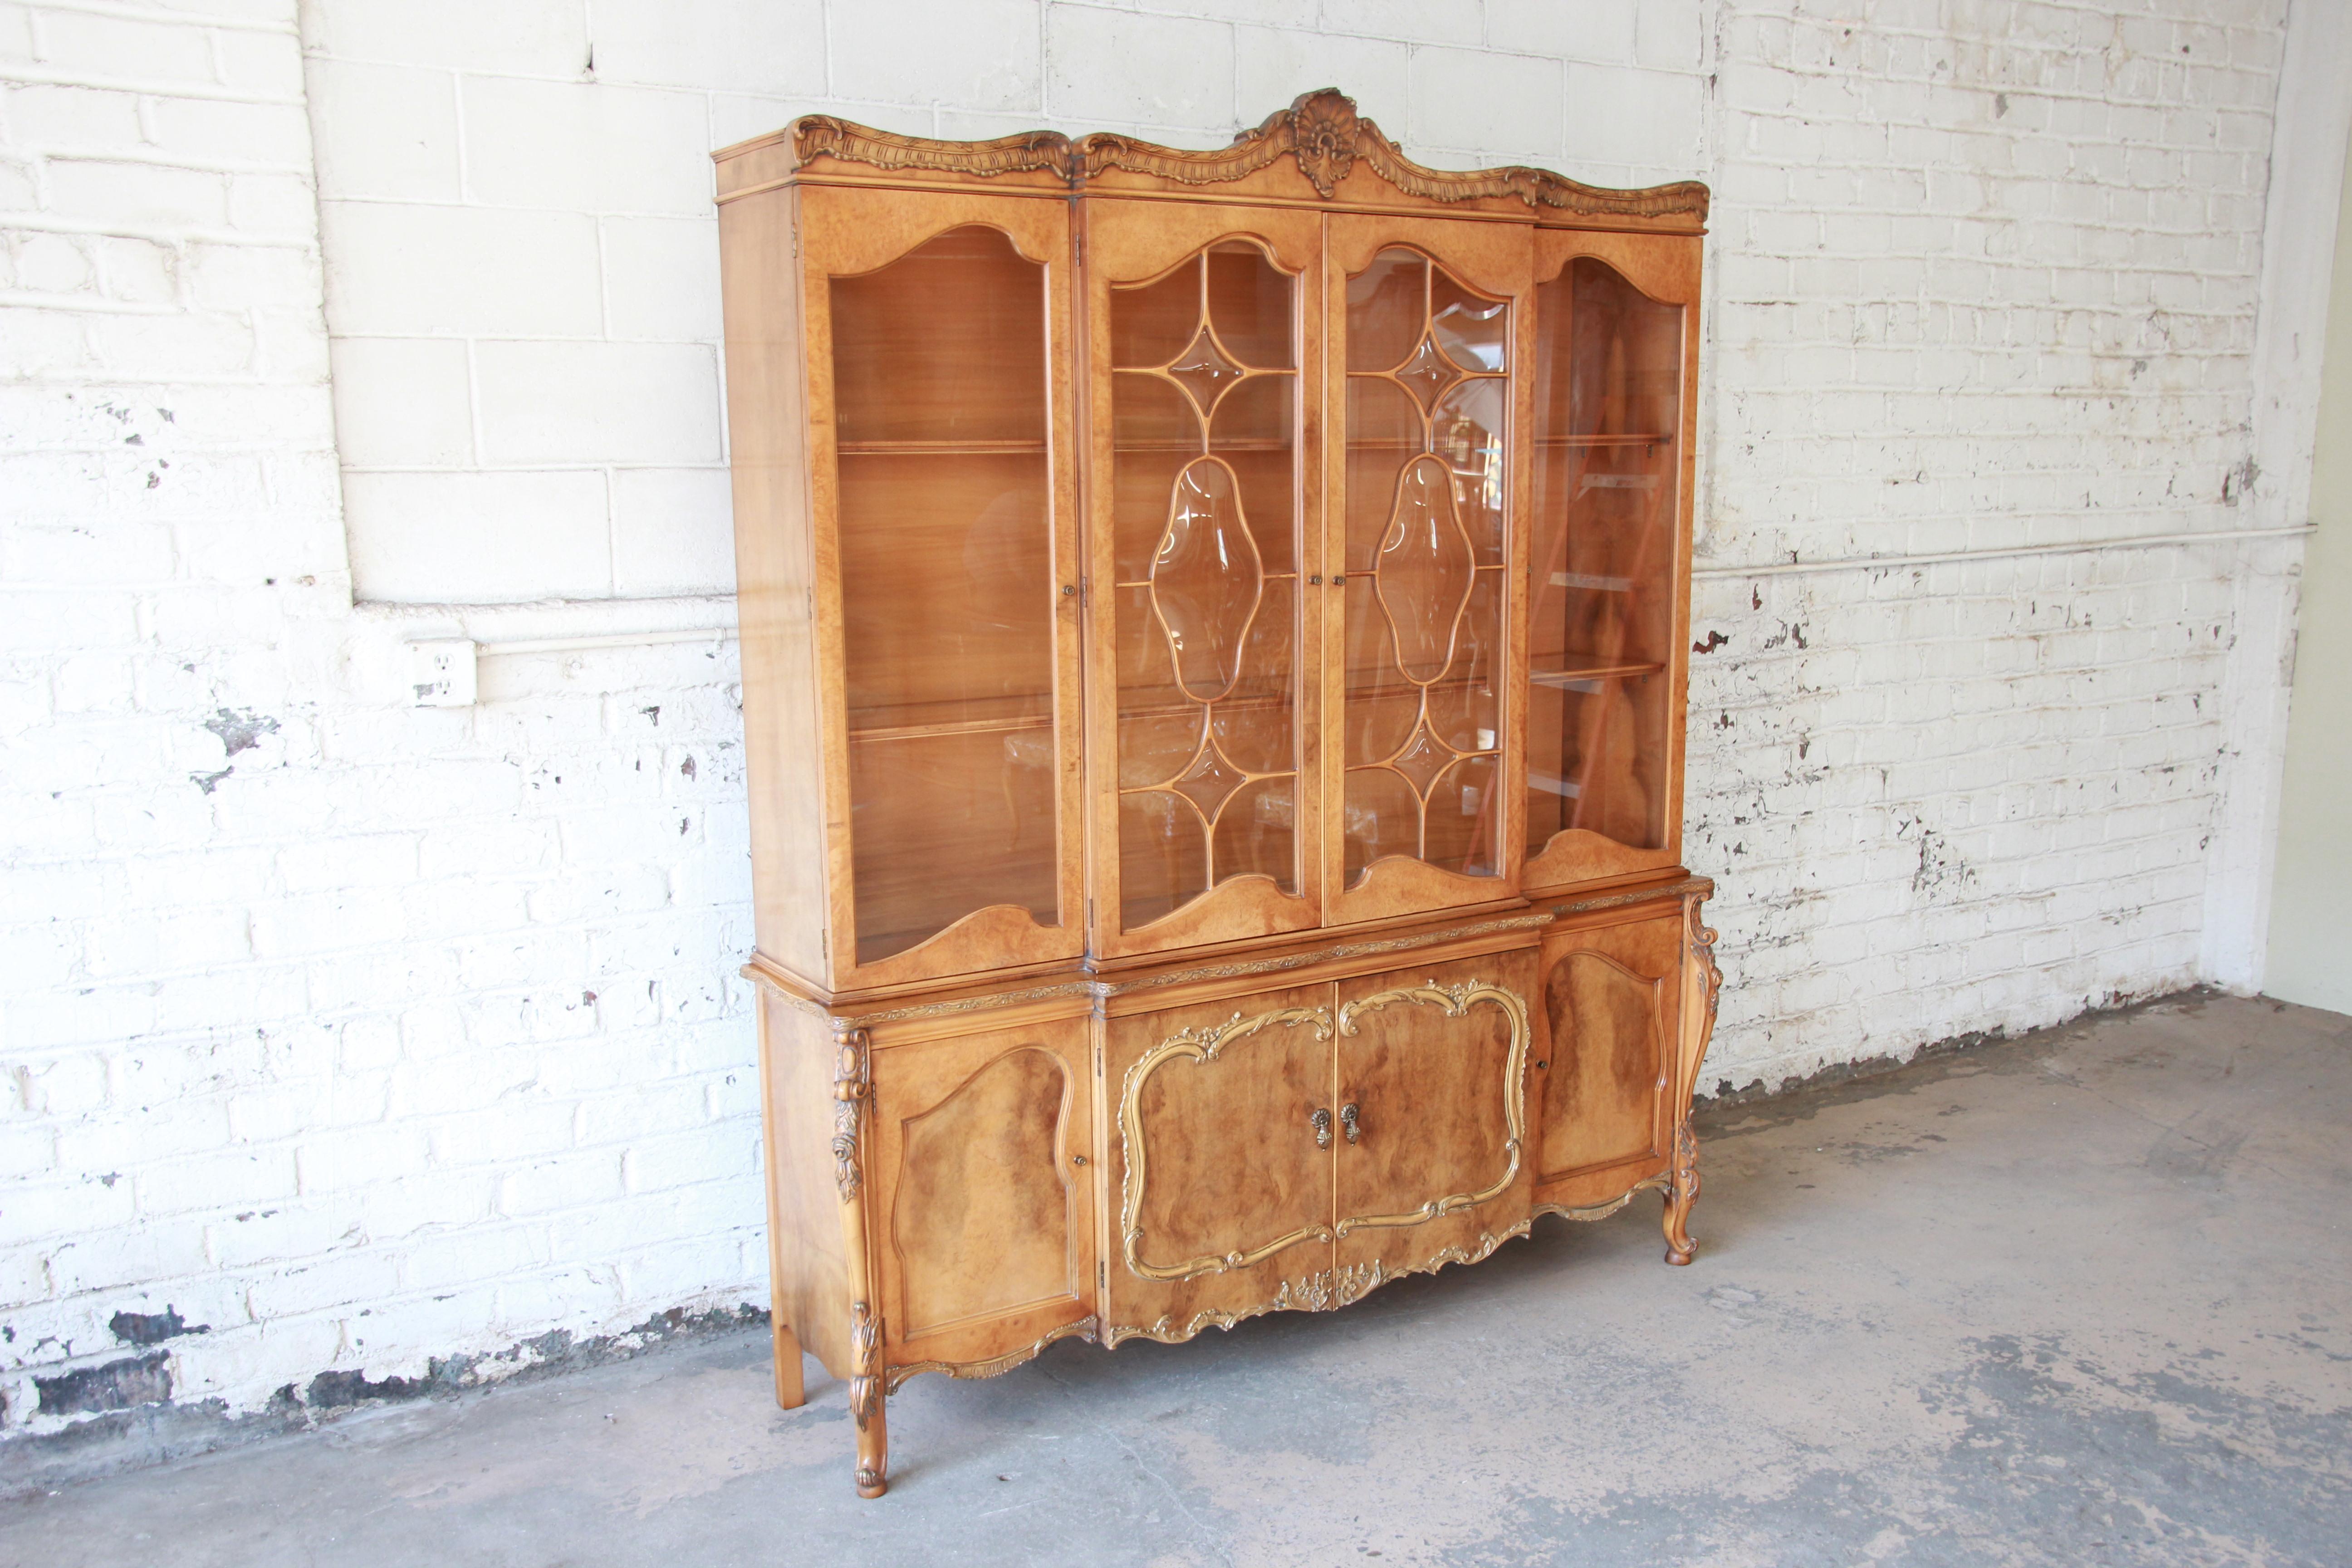 Offering an outstanding elegant Romweber burl wood French carved sideboard with hutch. The china cabinet has nice French carved details throughout the piece. The two centre bubble glass doors open up to two shelves that are shared shelves that are